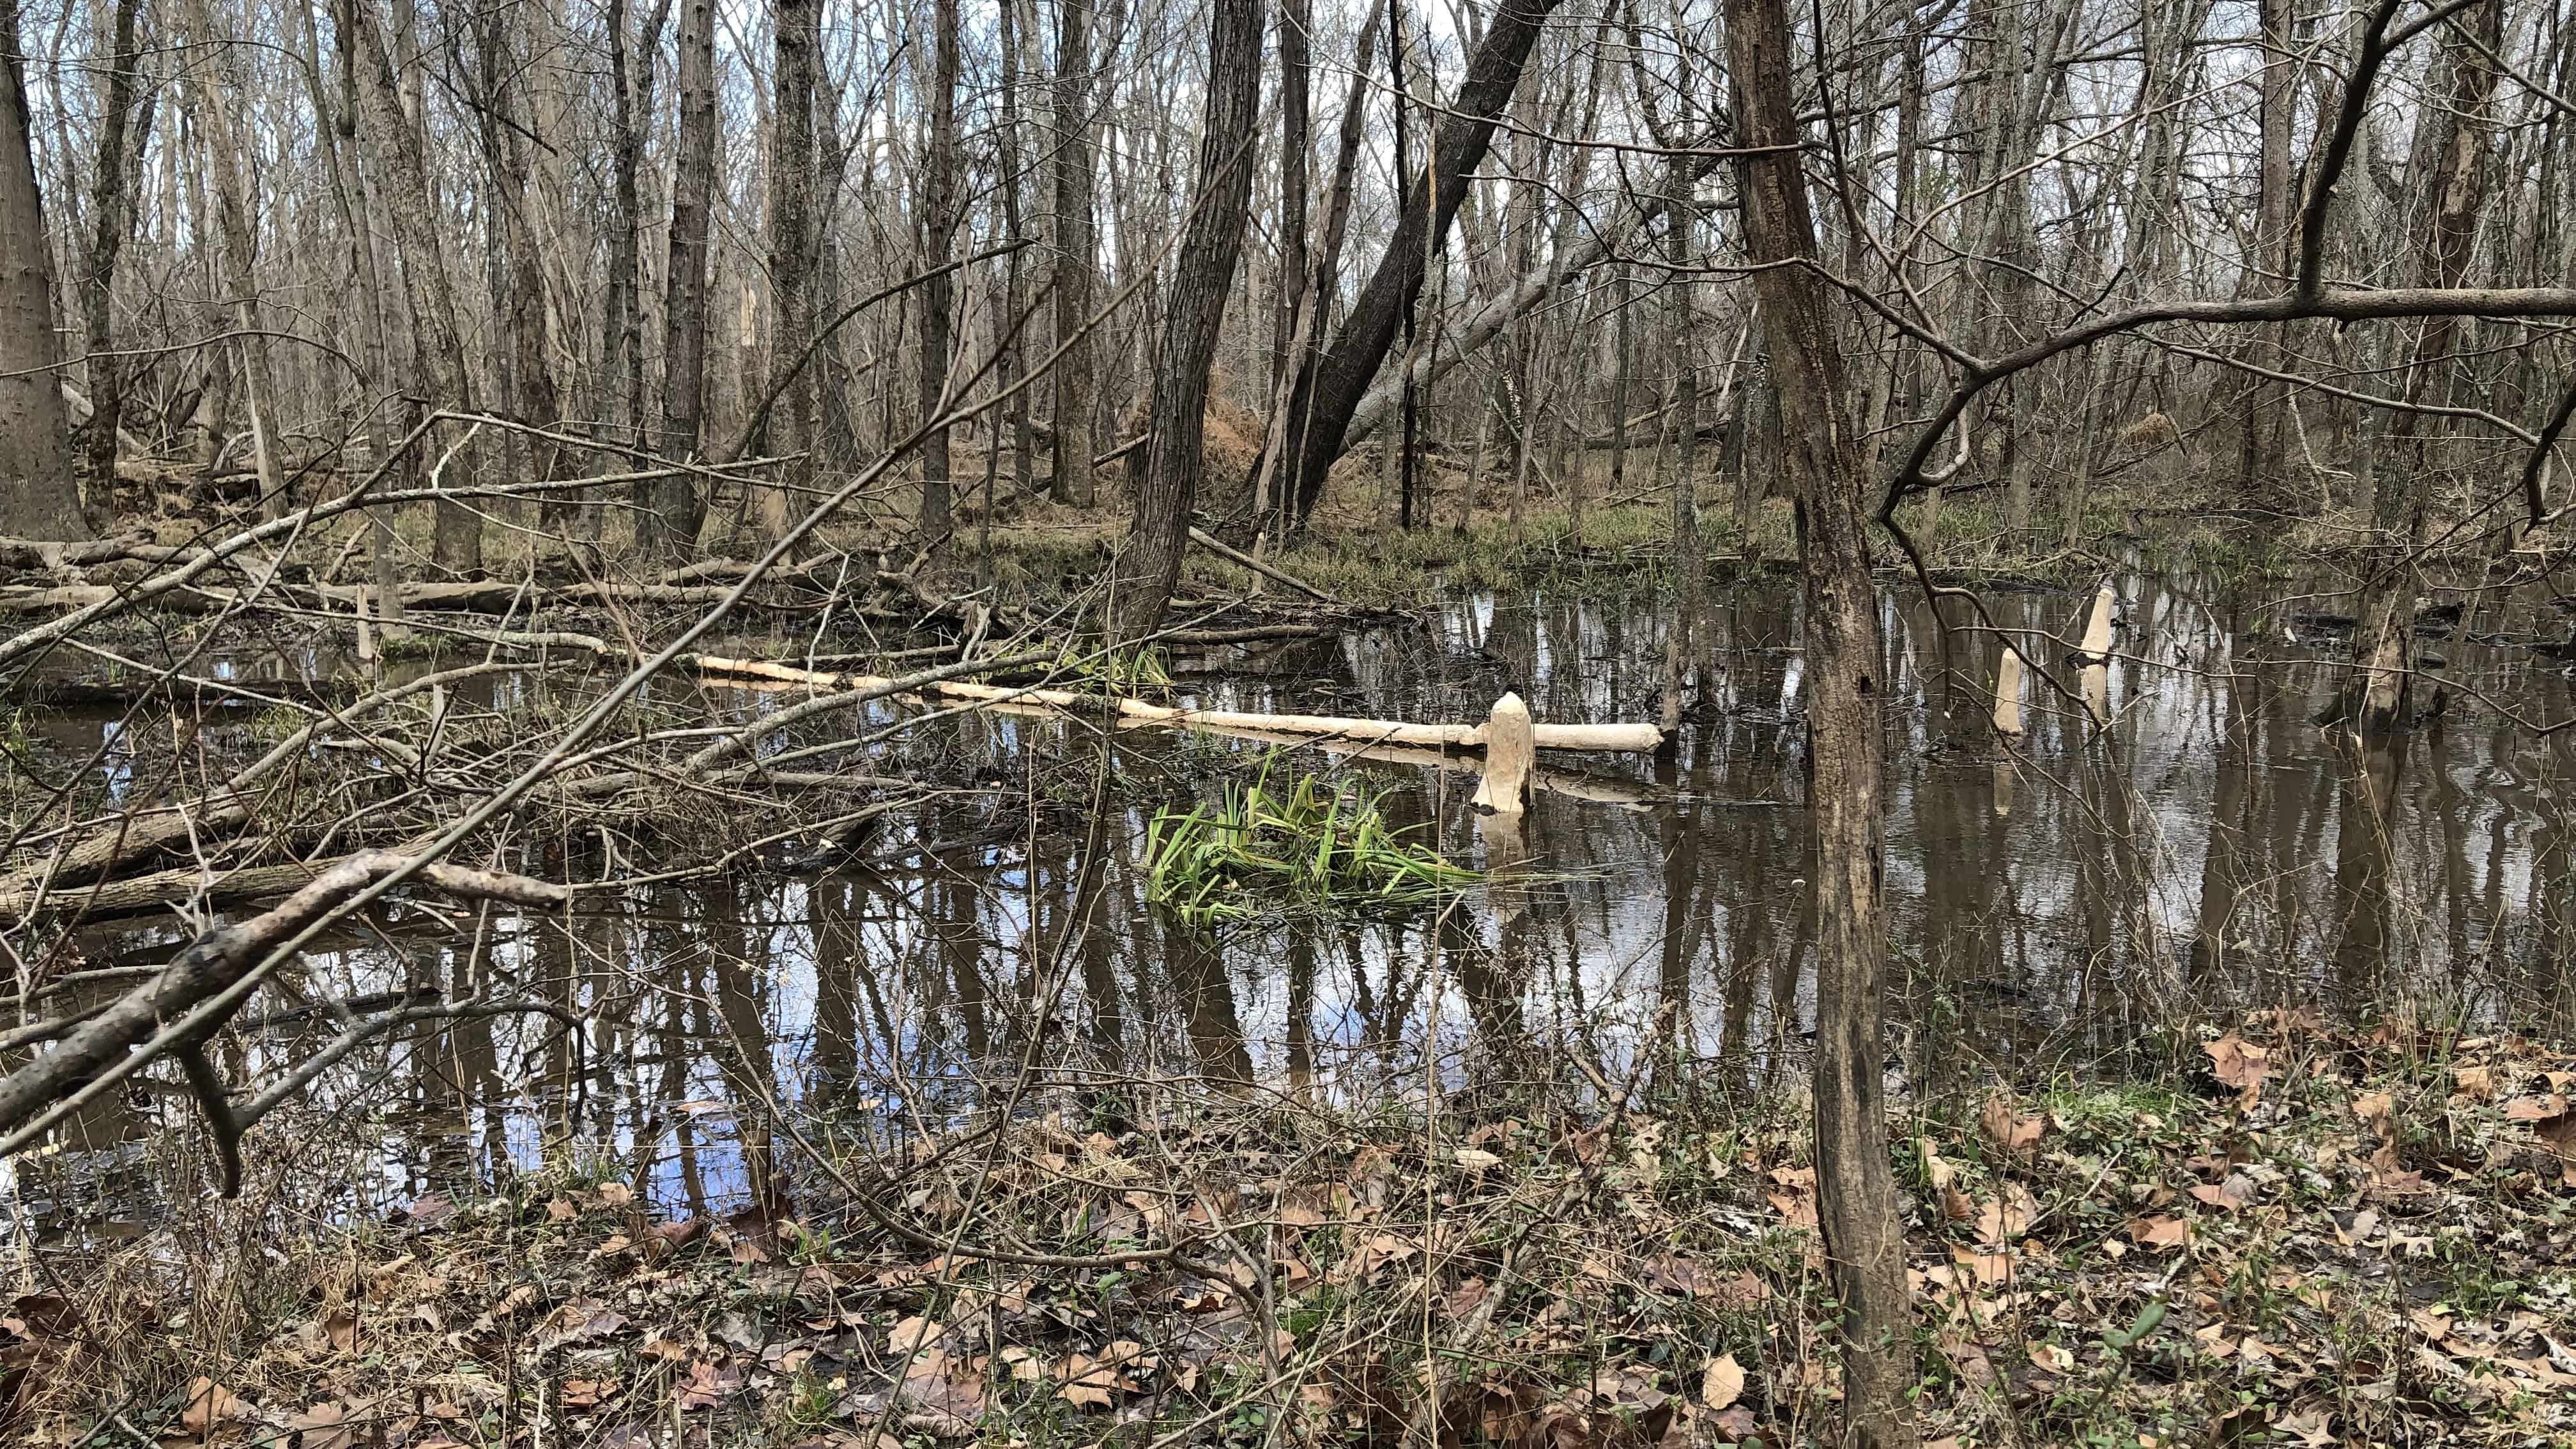 Beaver activity in a swampy forest area. 